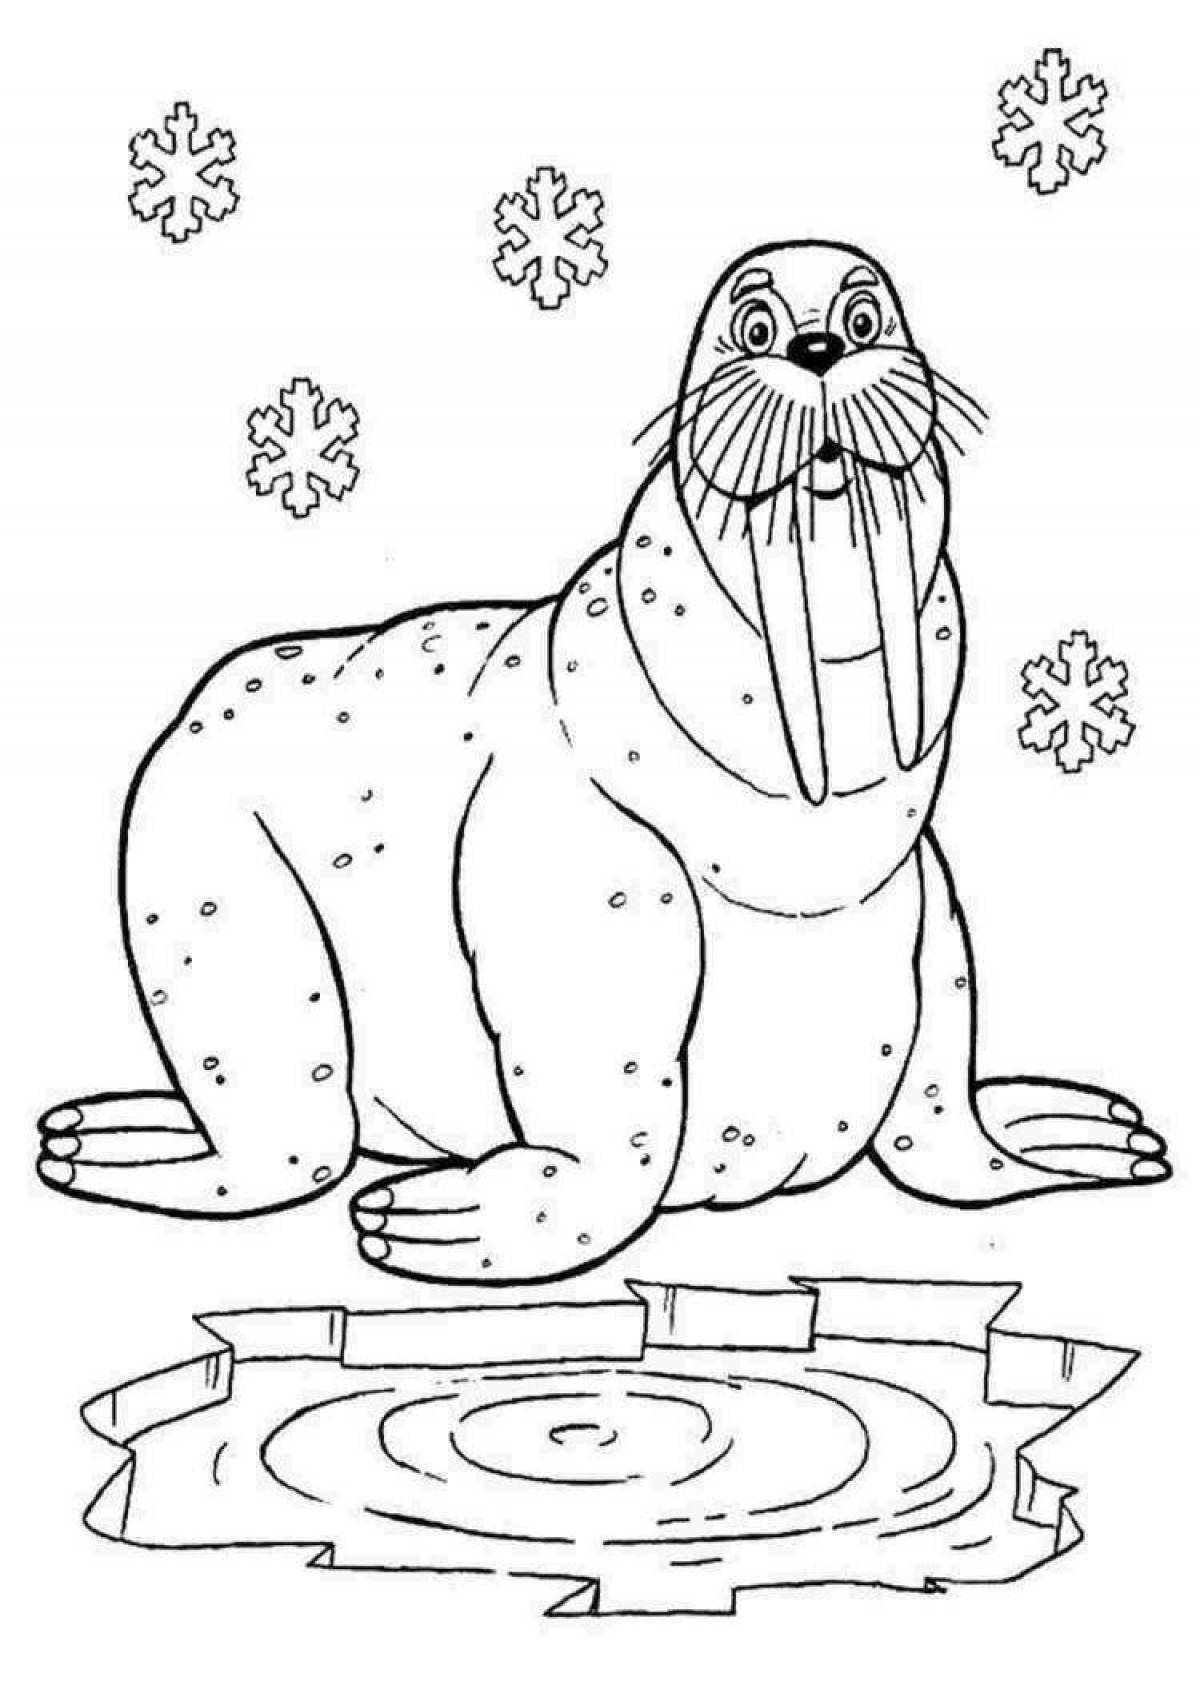 Coloring page amazing animals of the far north